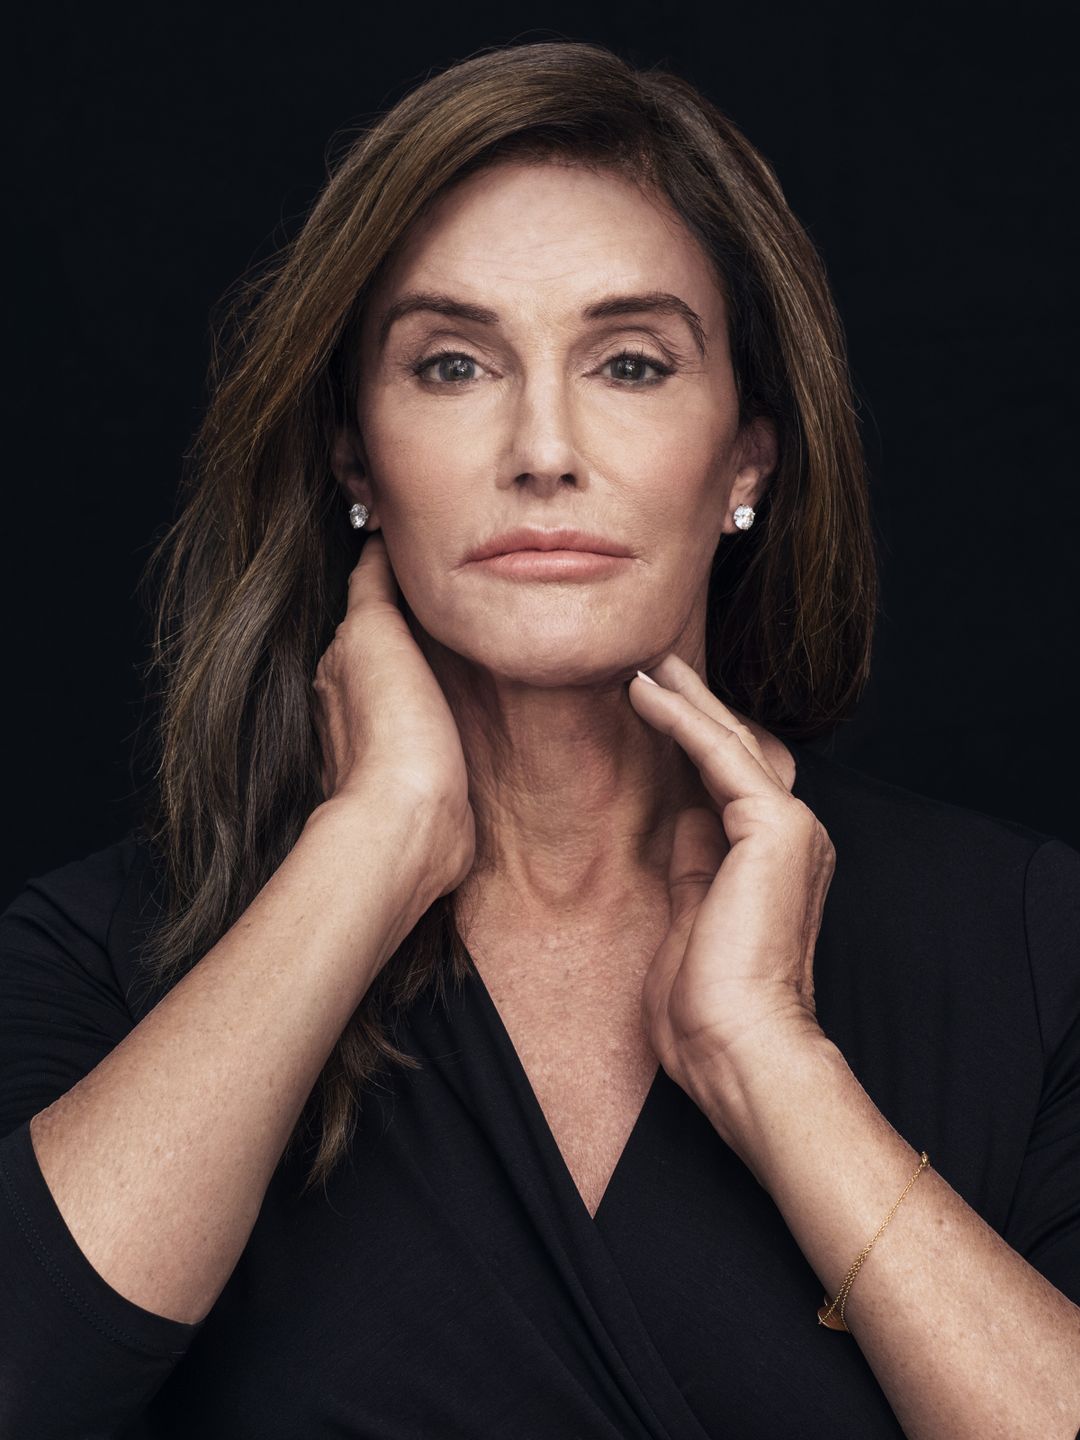 Caitlyn Jenner in her teens